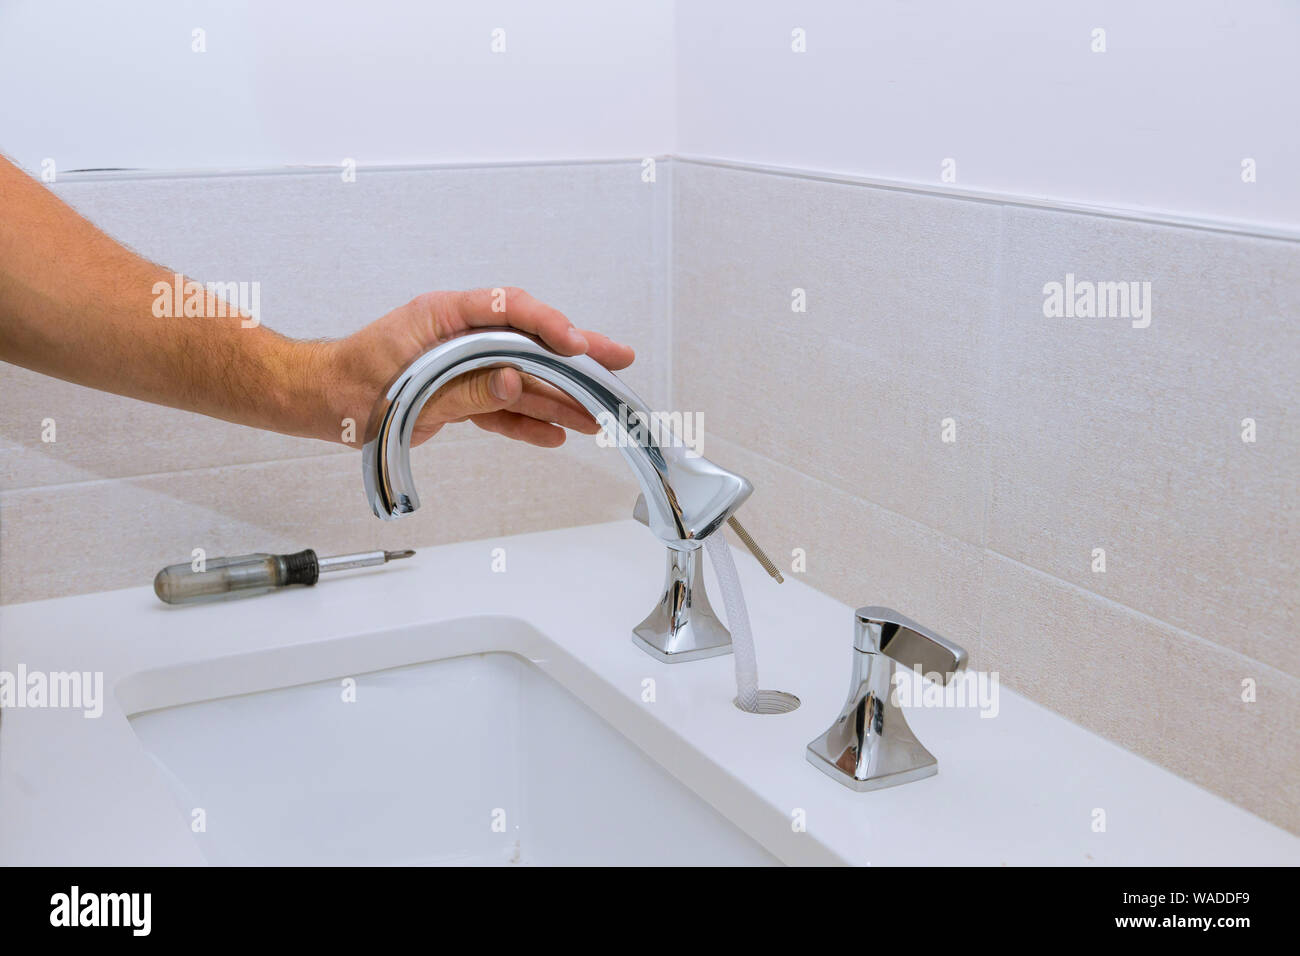 Repair service, assemble and install new faucet lies on the ceramic sink Stock Photo